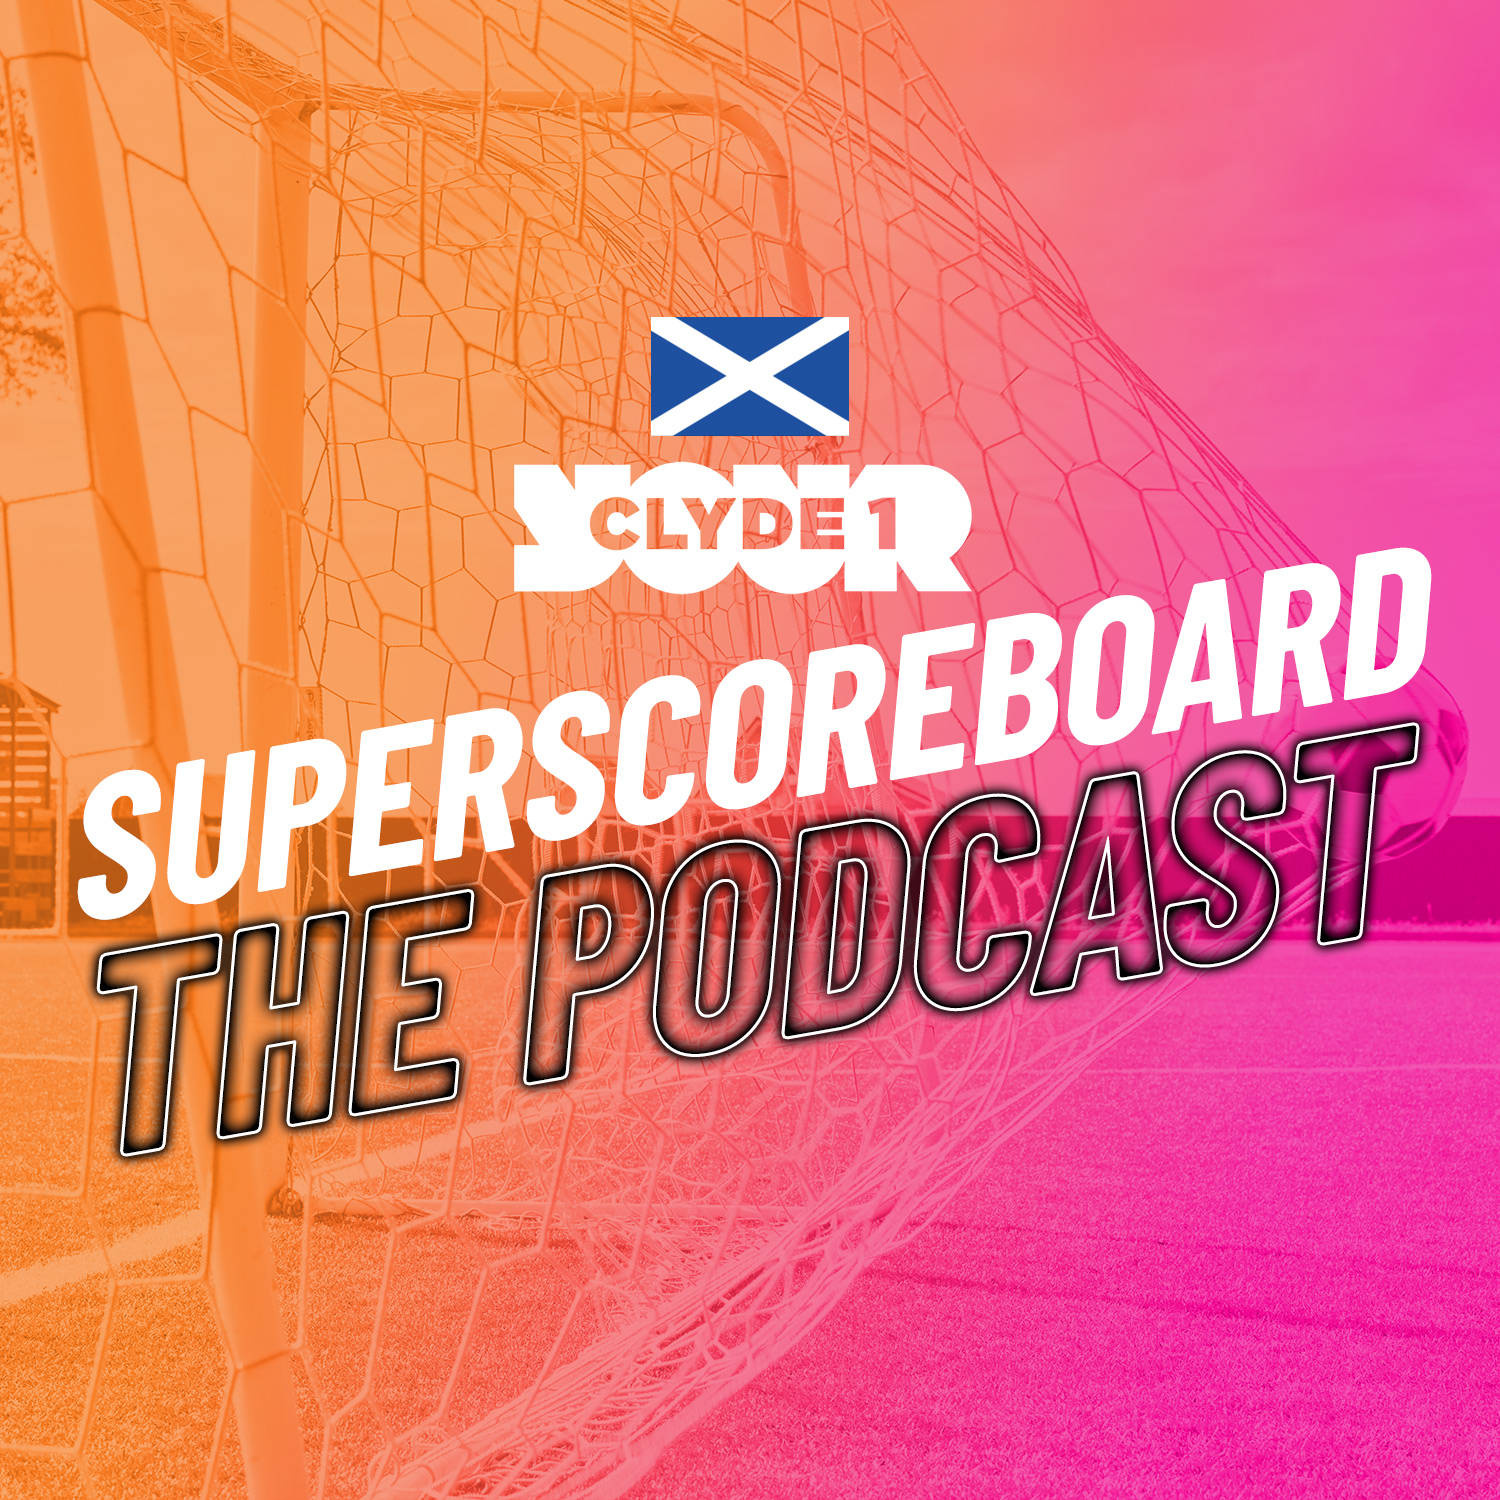 Sunday 10th March Clyde 1 Superscoreboard – Part 2